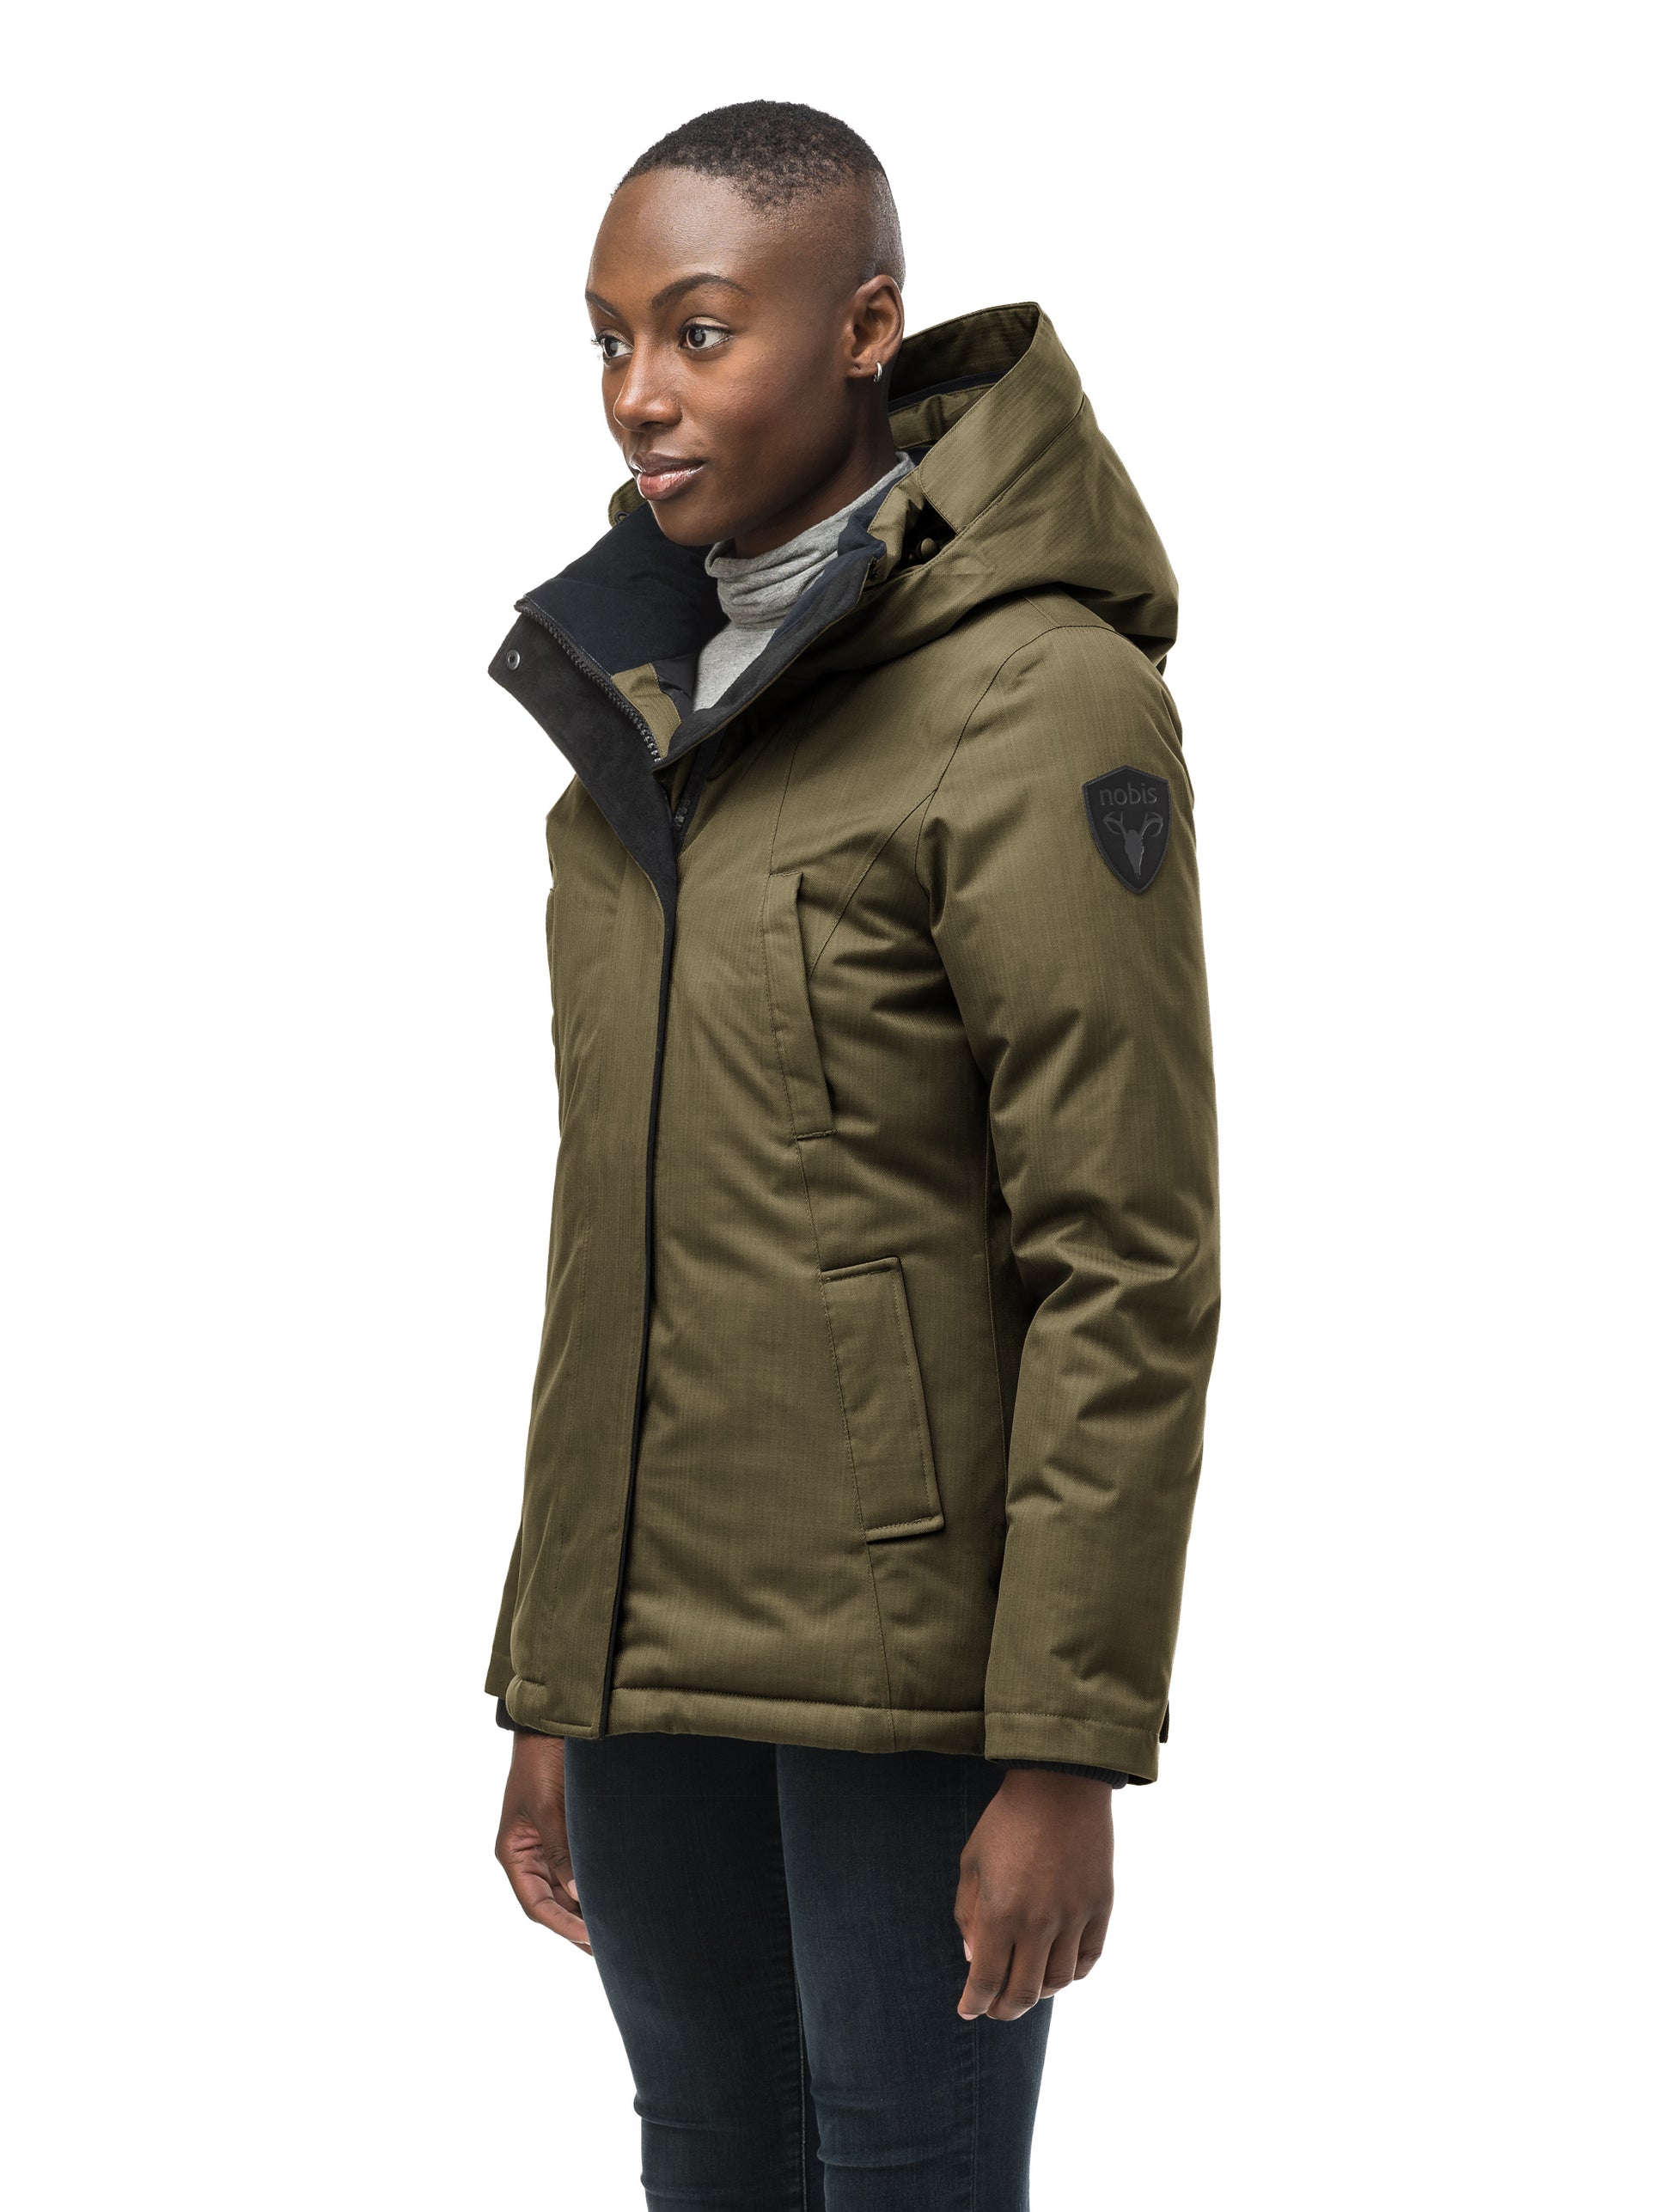 Women's hip length down filled parka in CH Army Green